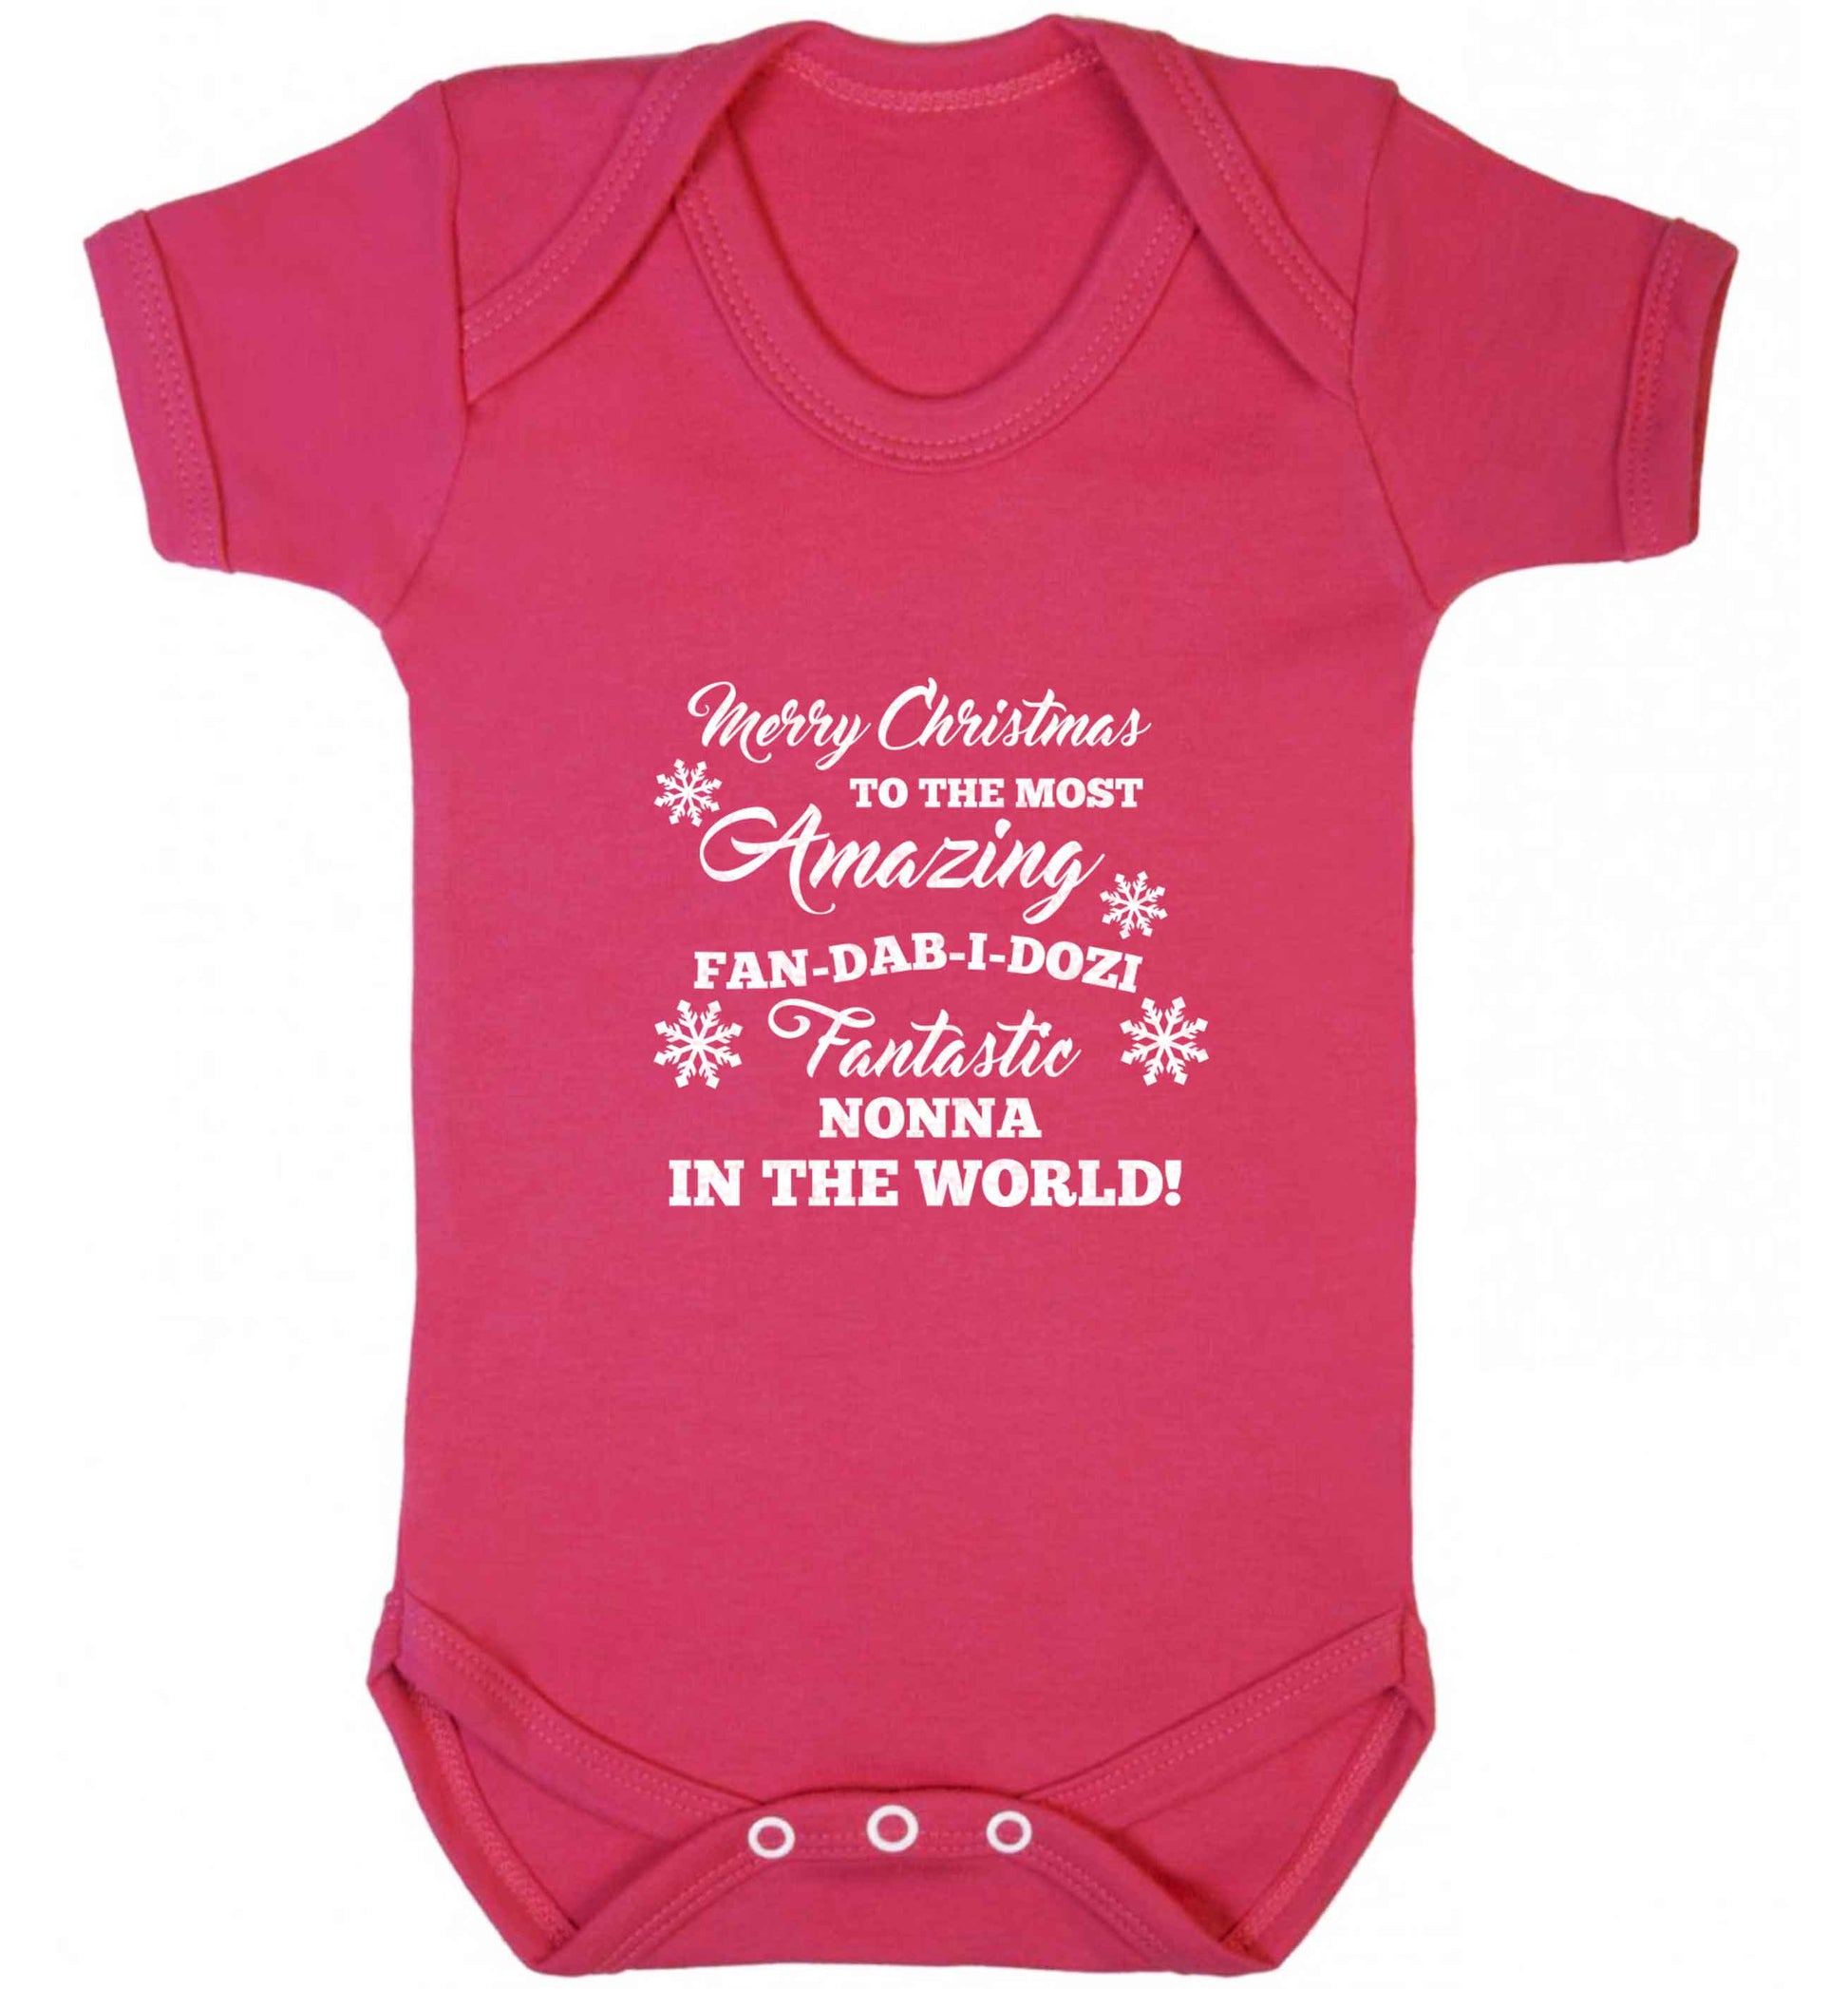 Merry Christmas to the most amazing fan-dab-i-dozi fantasic Nonna in the world baby vest dark pink 18-24 months